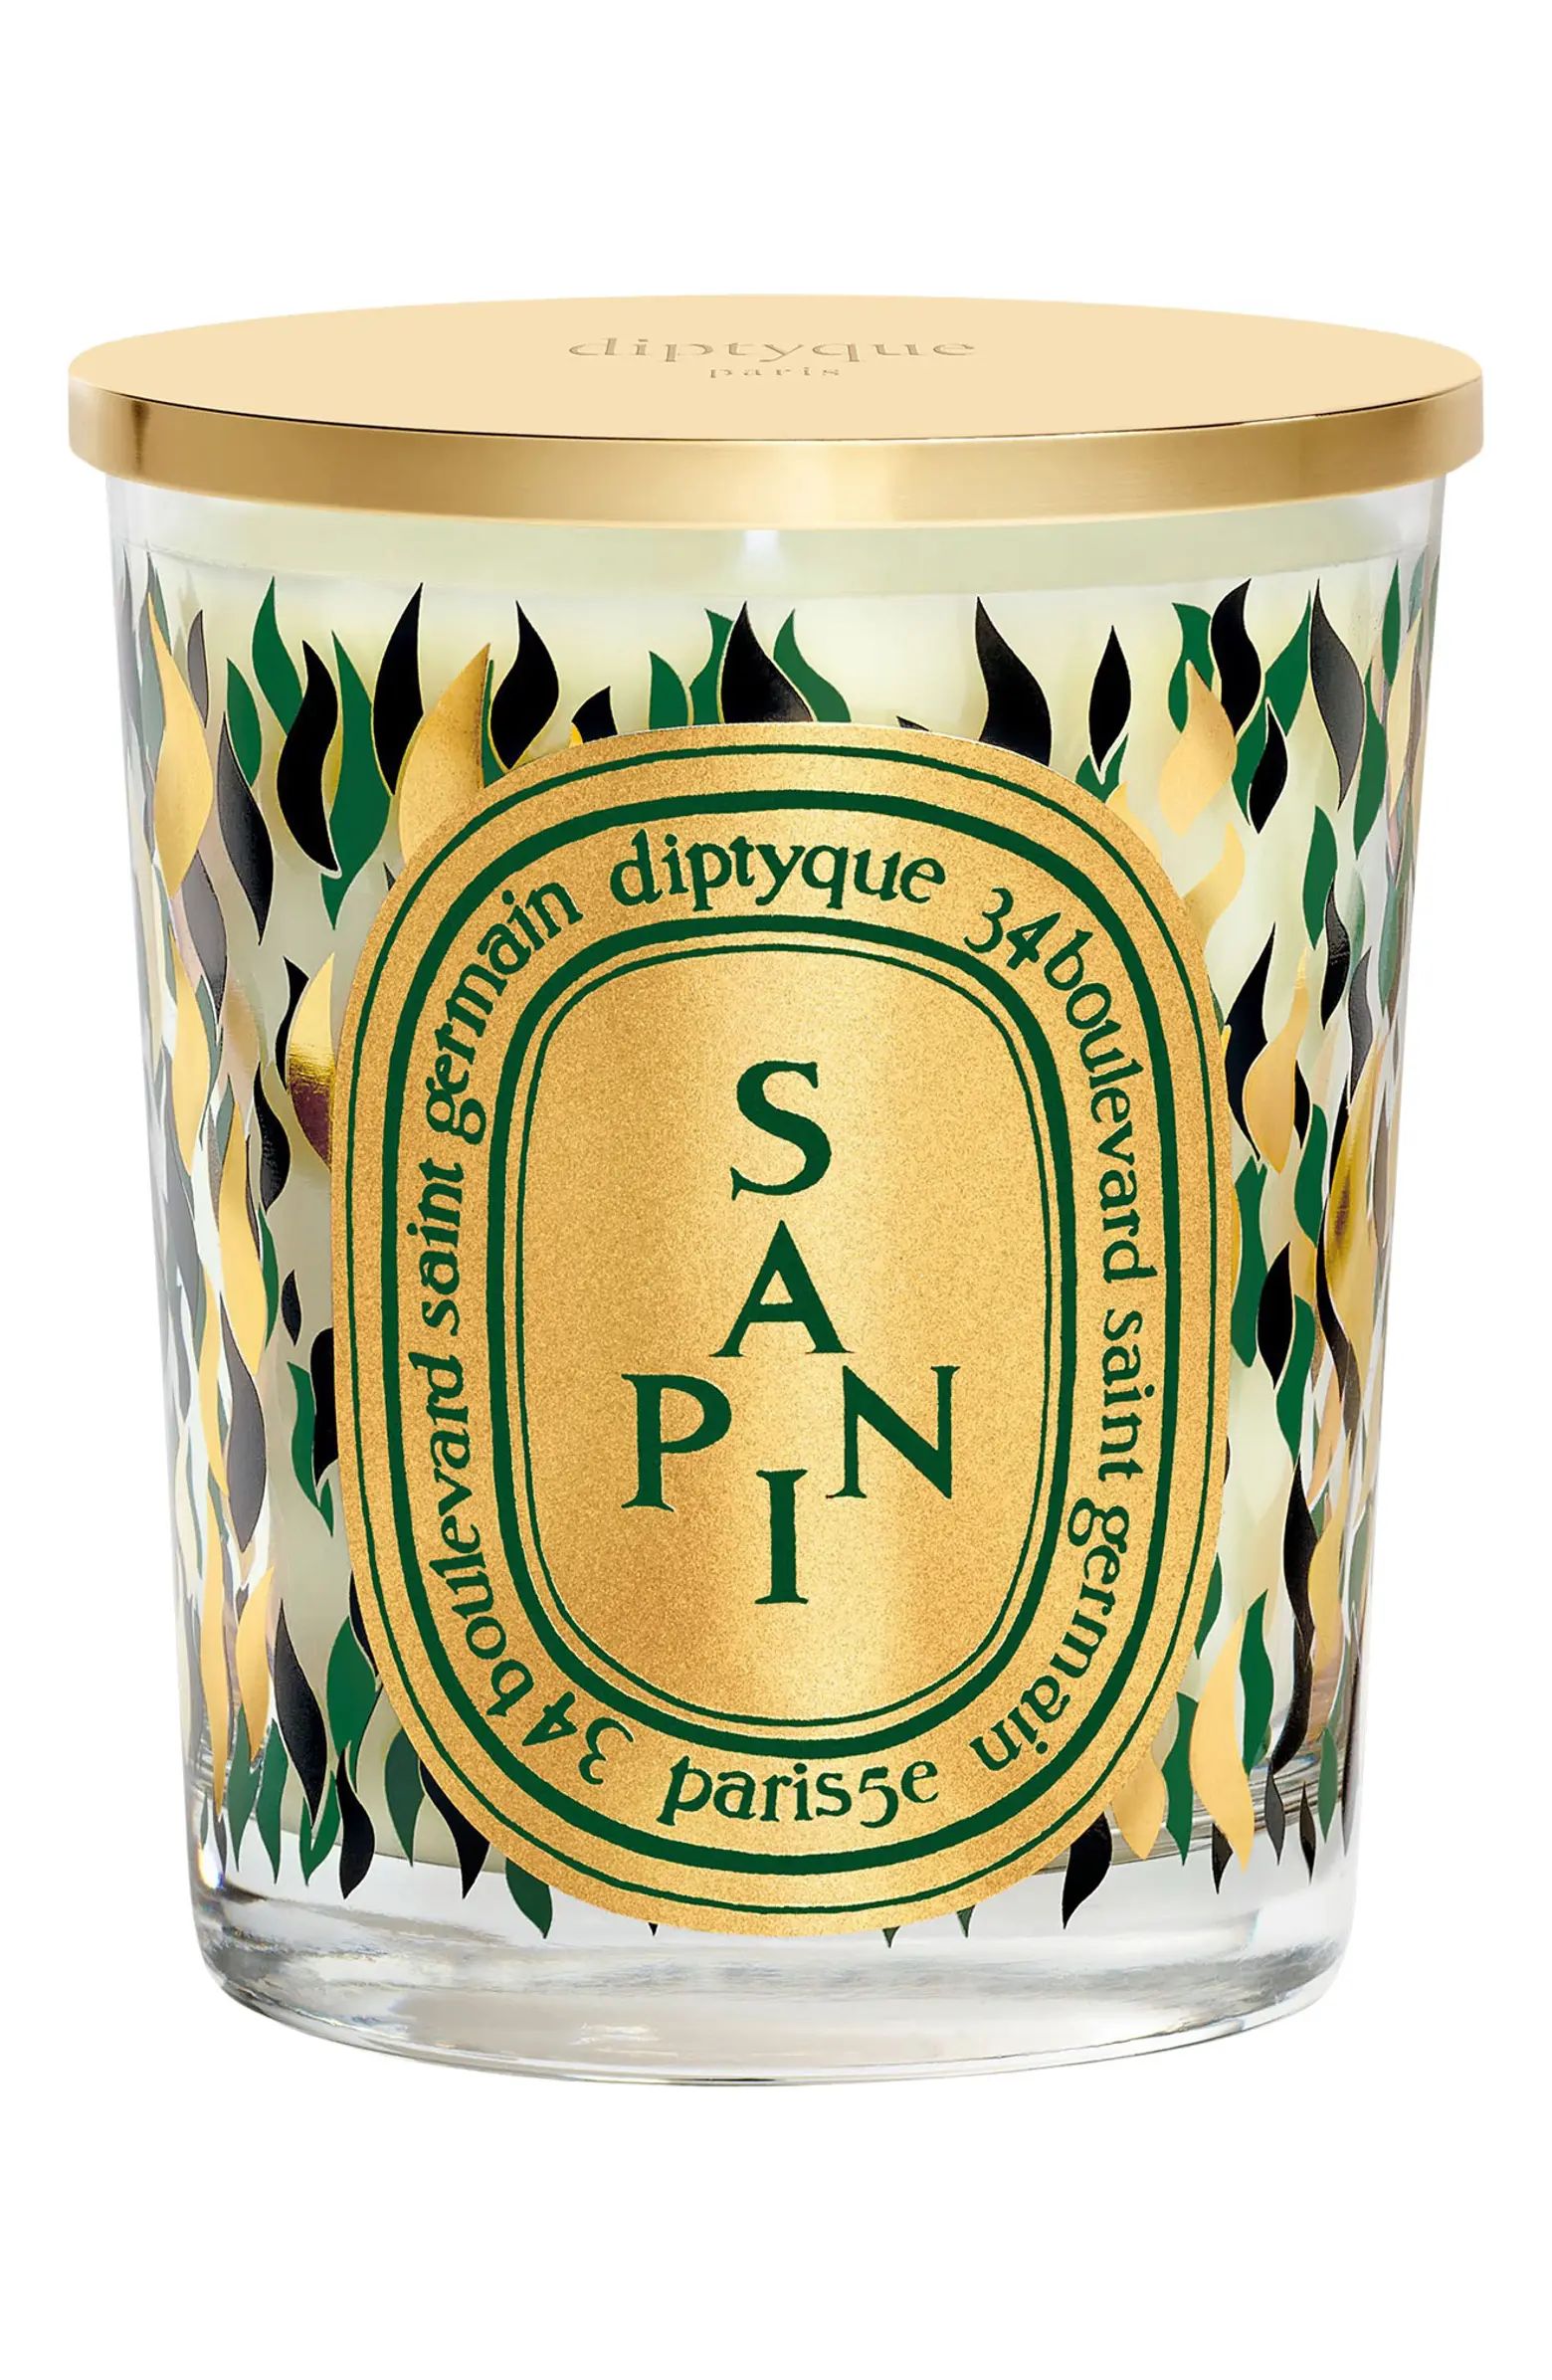 Sapin (Pine) Scented Candle | Nordstrom